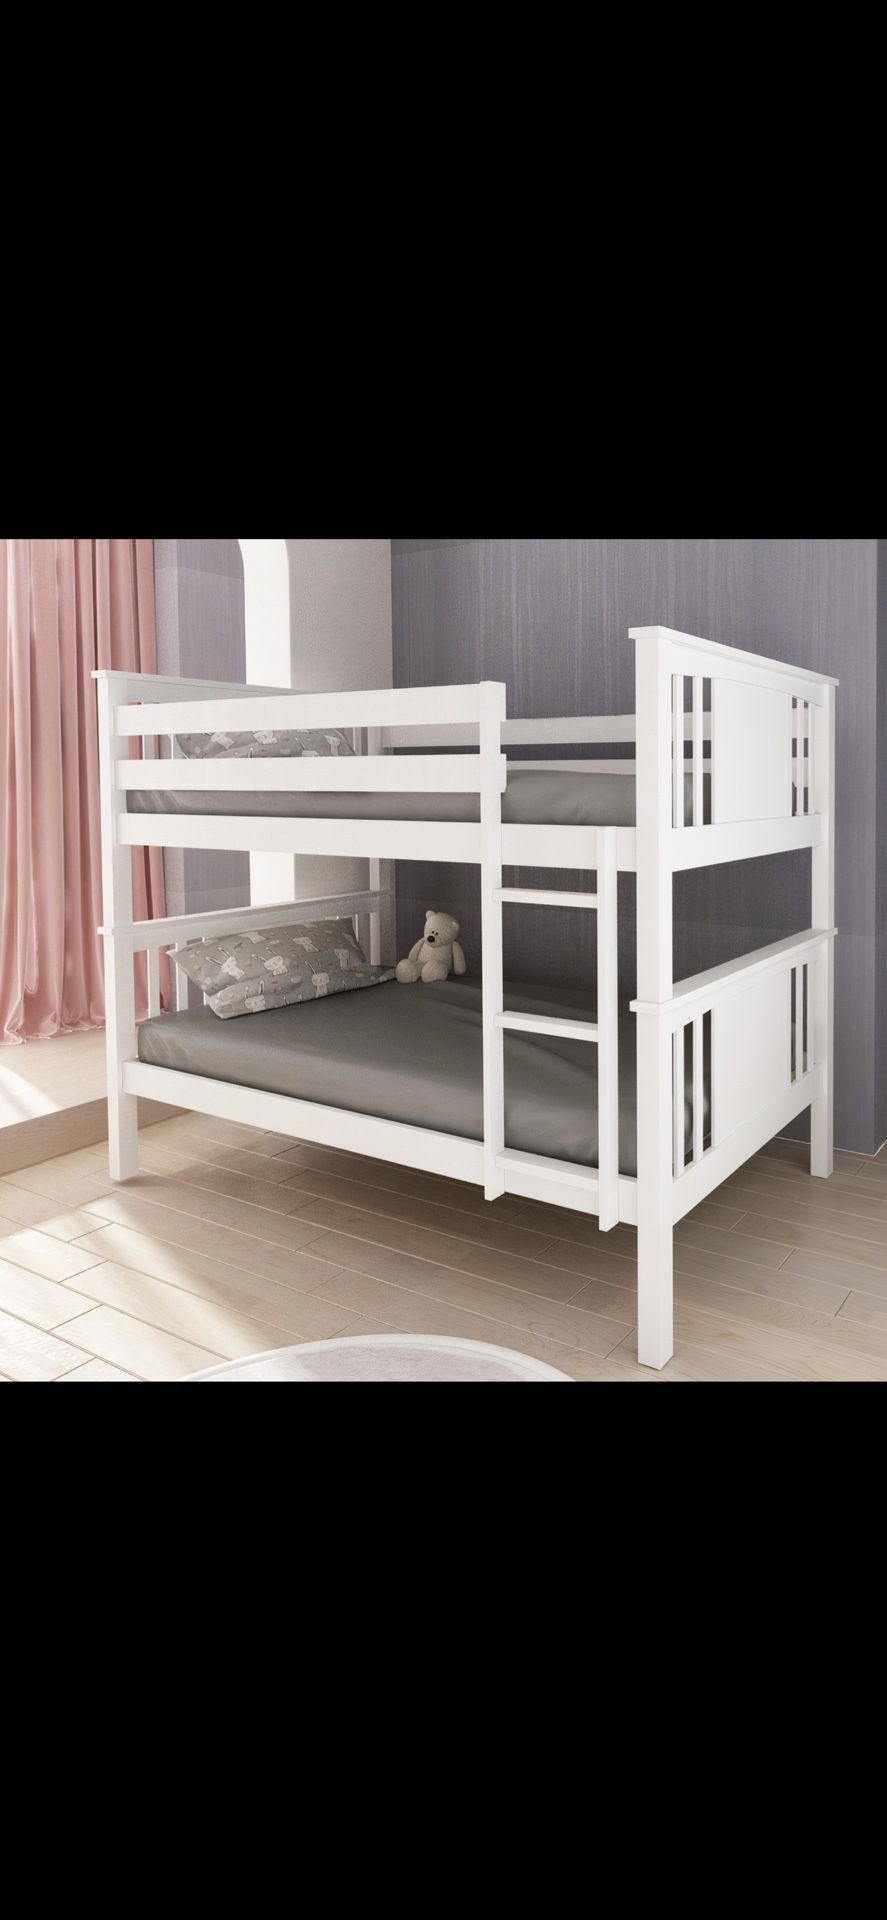 $280 Twin Bunk Bed Not Including Mattress 